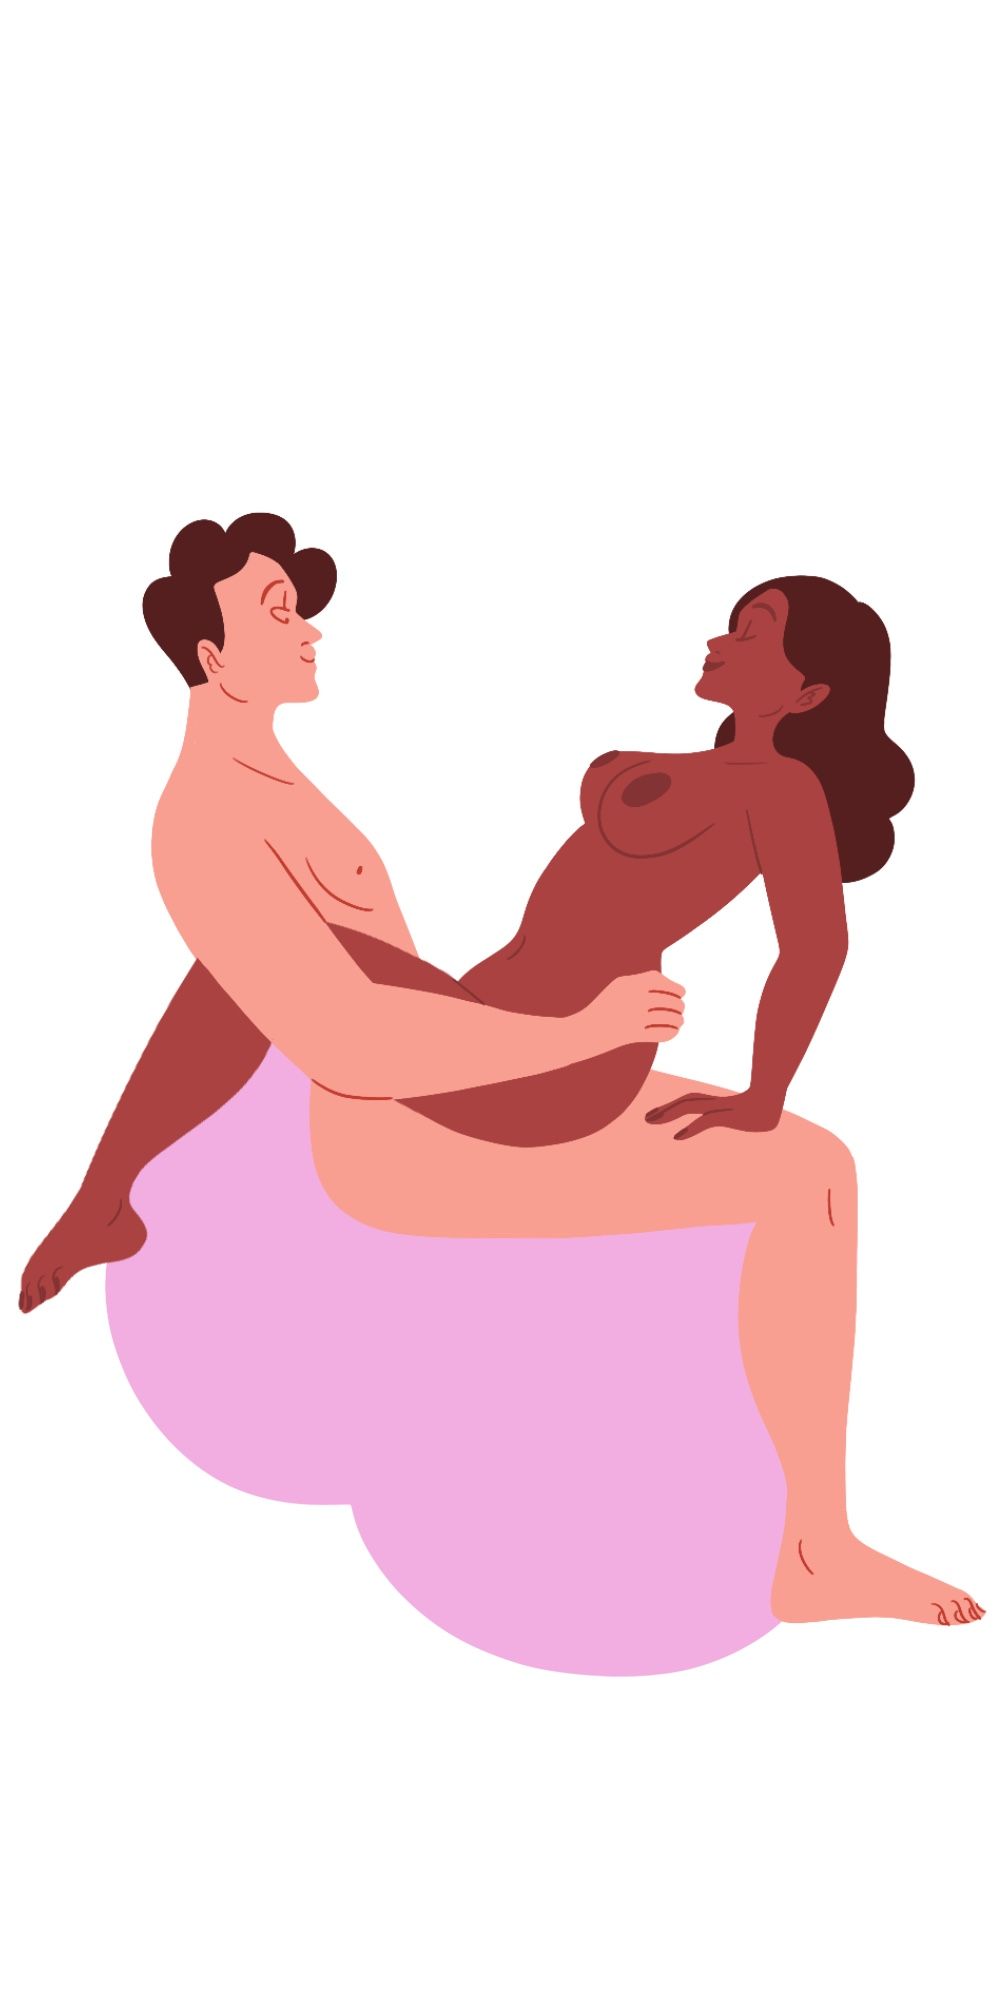 13 Cowgirl Sex Positions